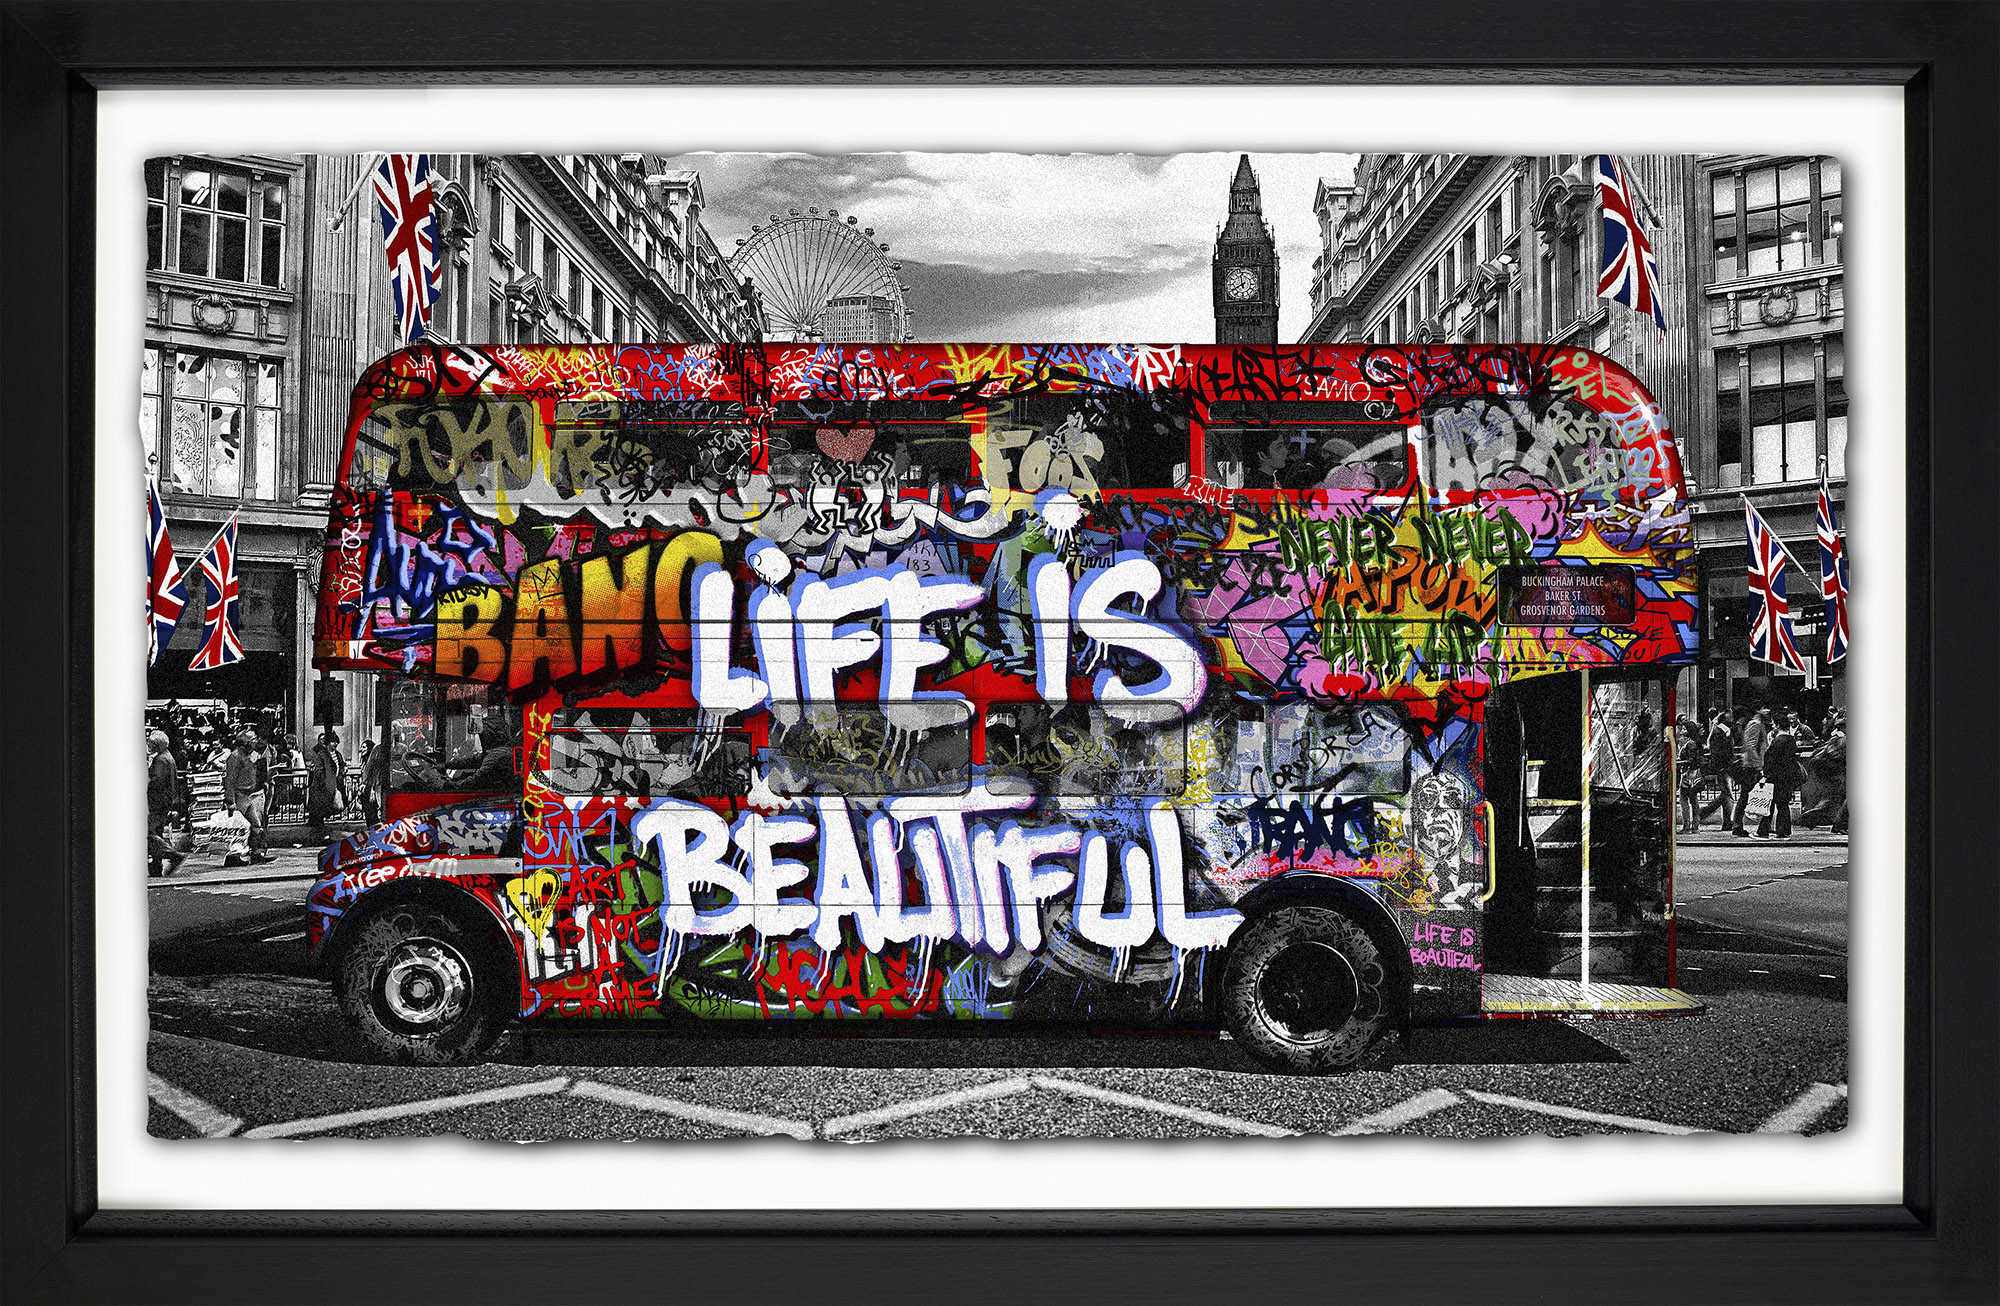 A painting of a double decker bus from Mr. Brainwash's installation at Battersea Power Station